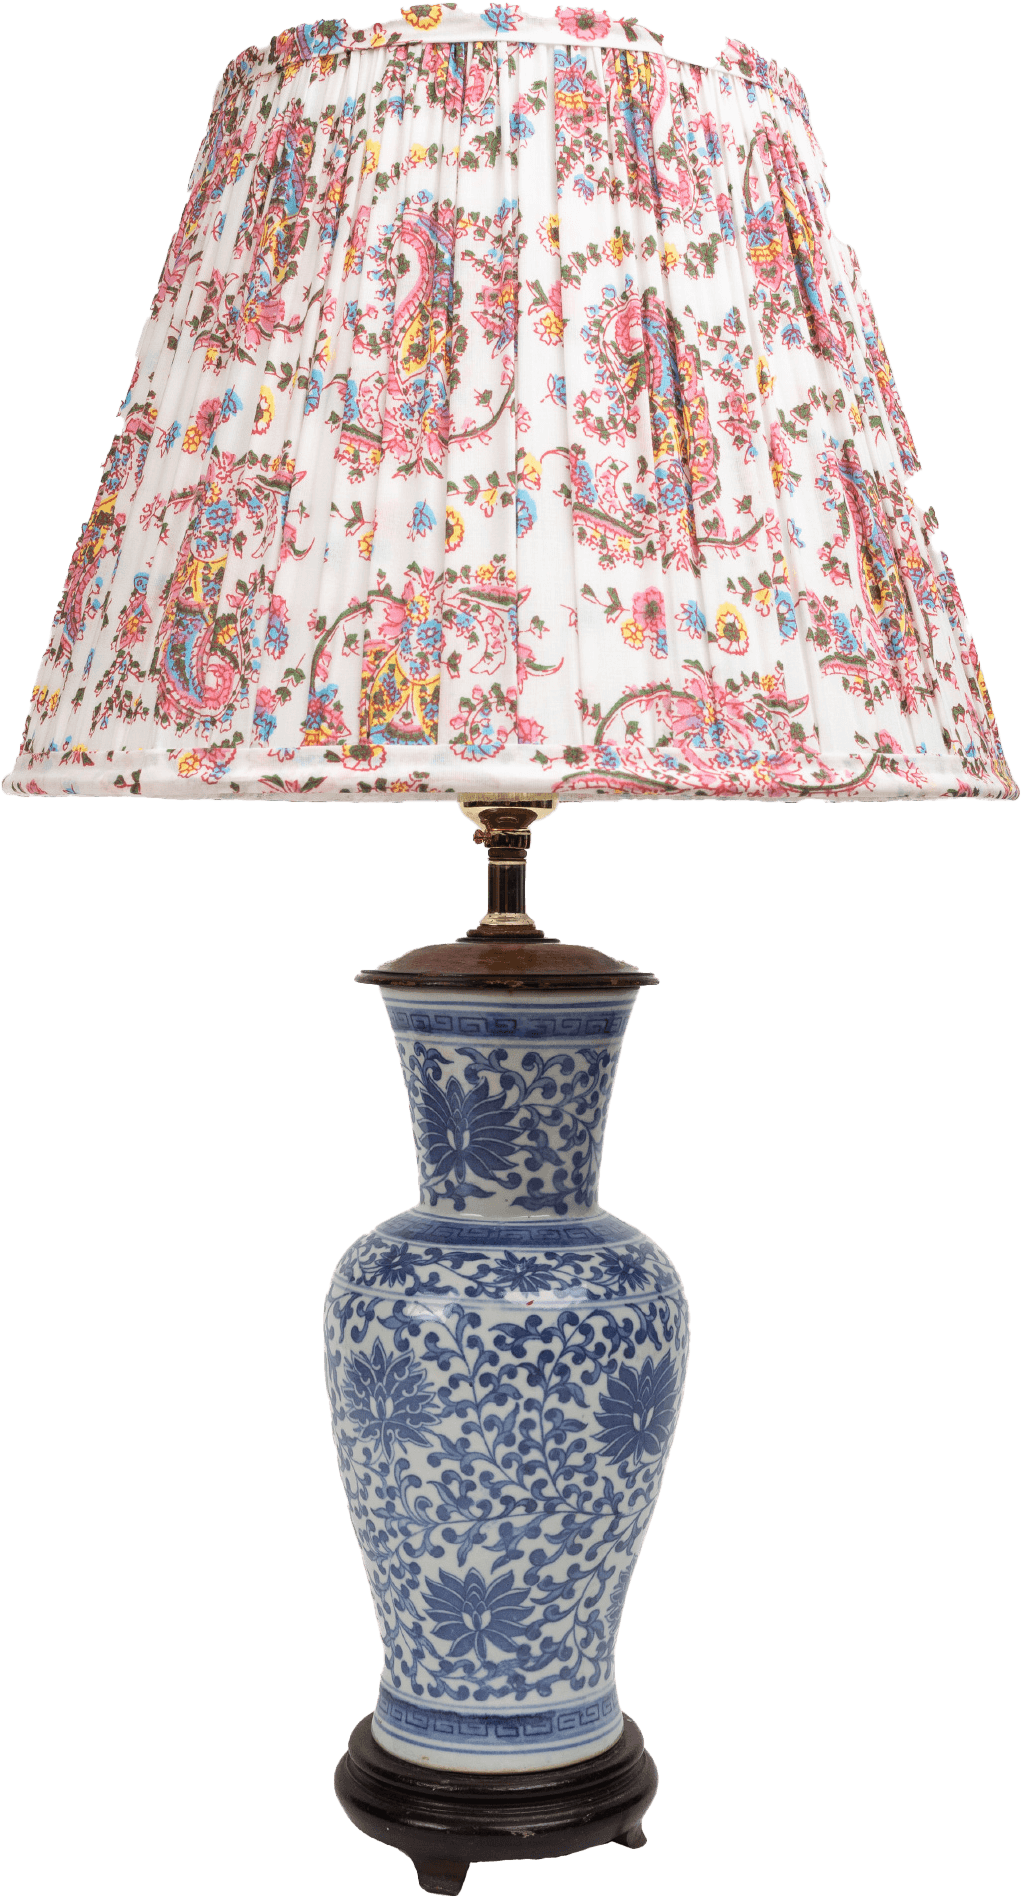 Pleated Lampshade in Paisley Pink with Uno Fitting